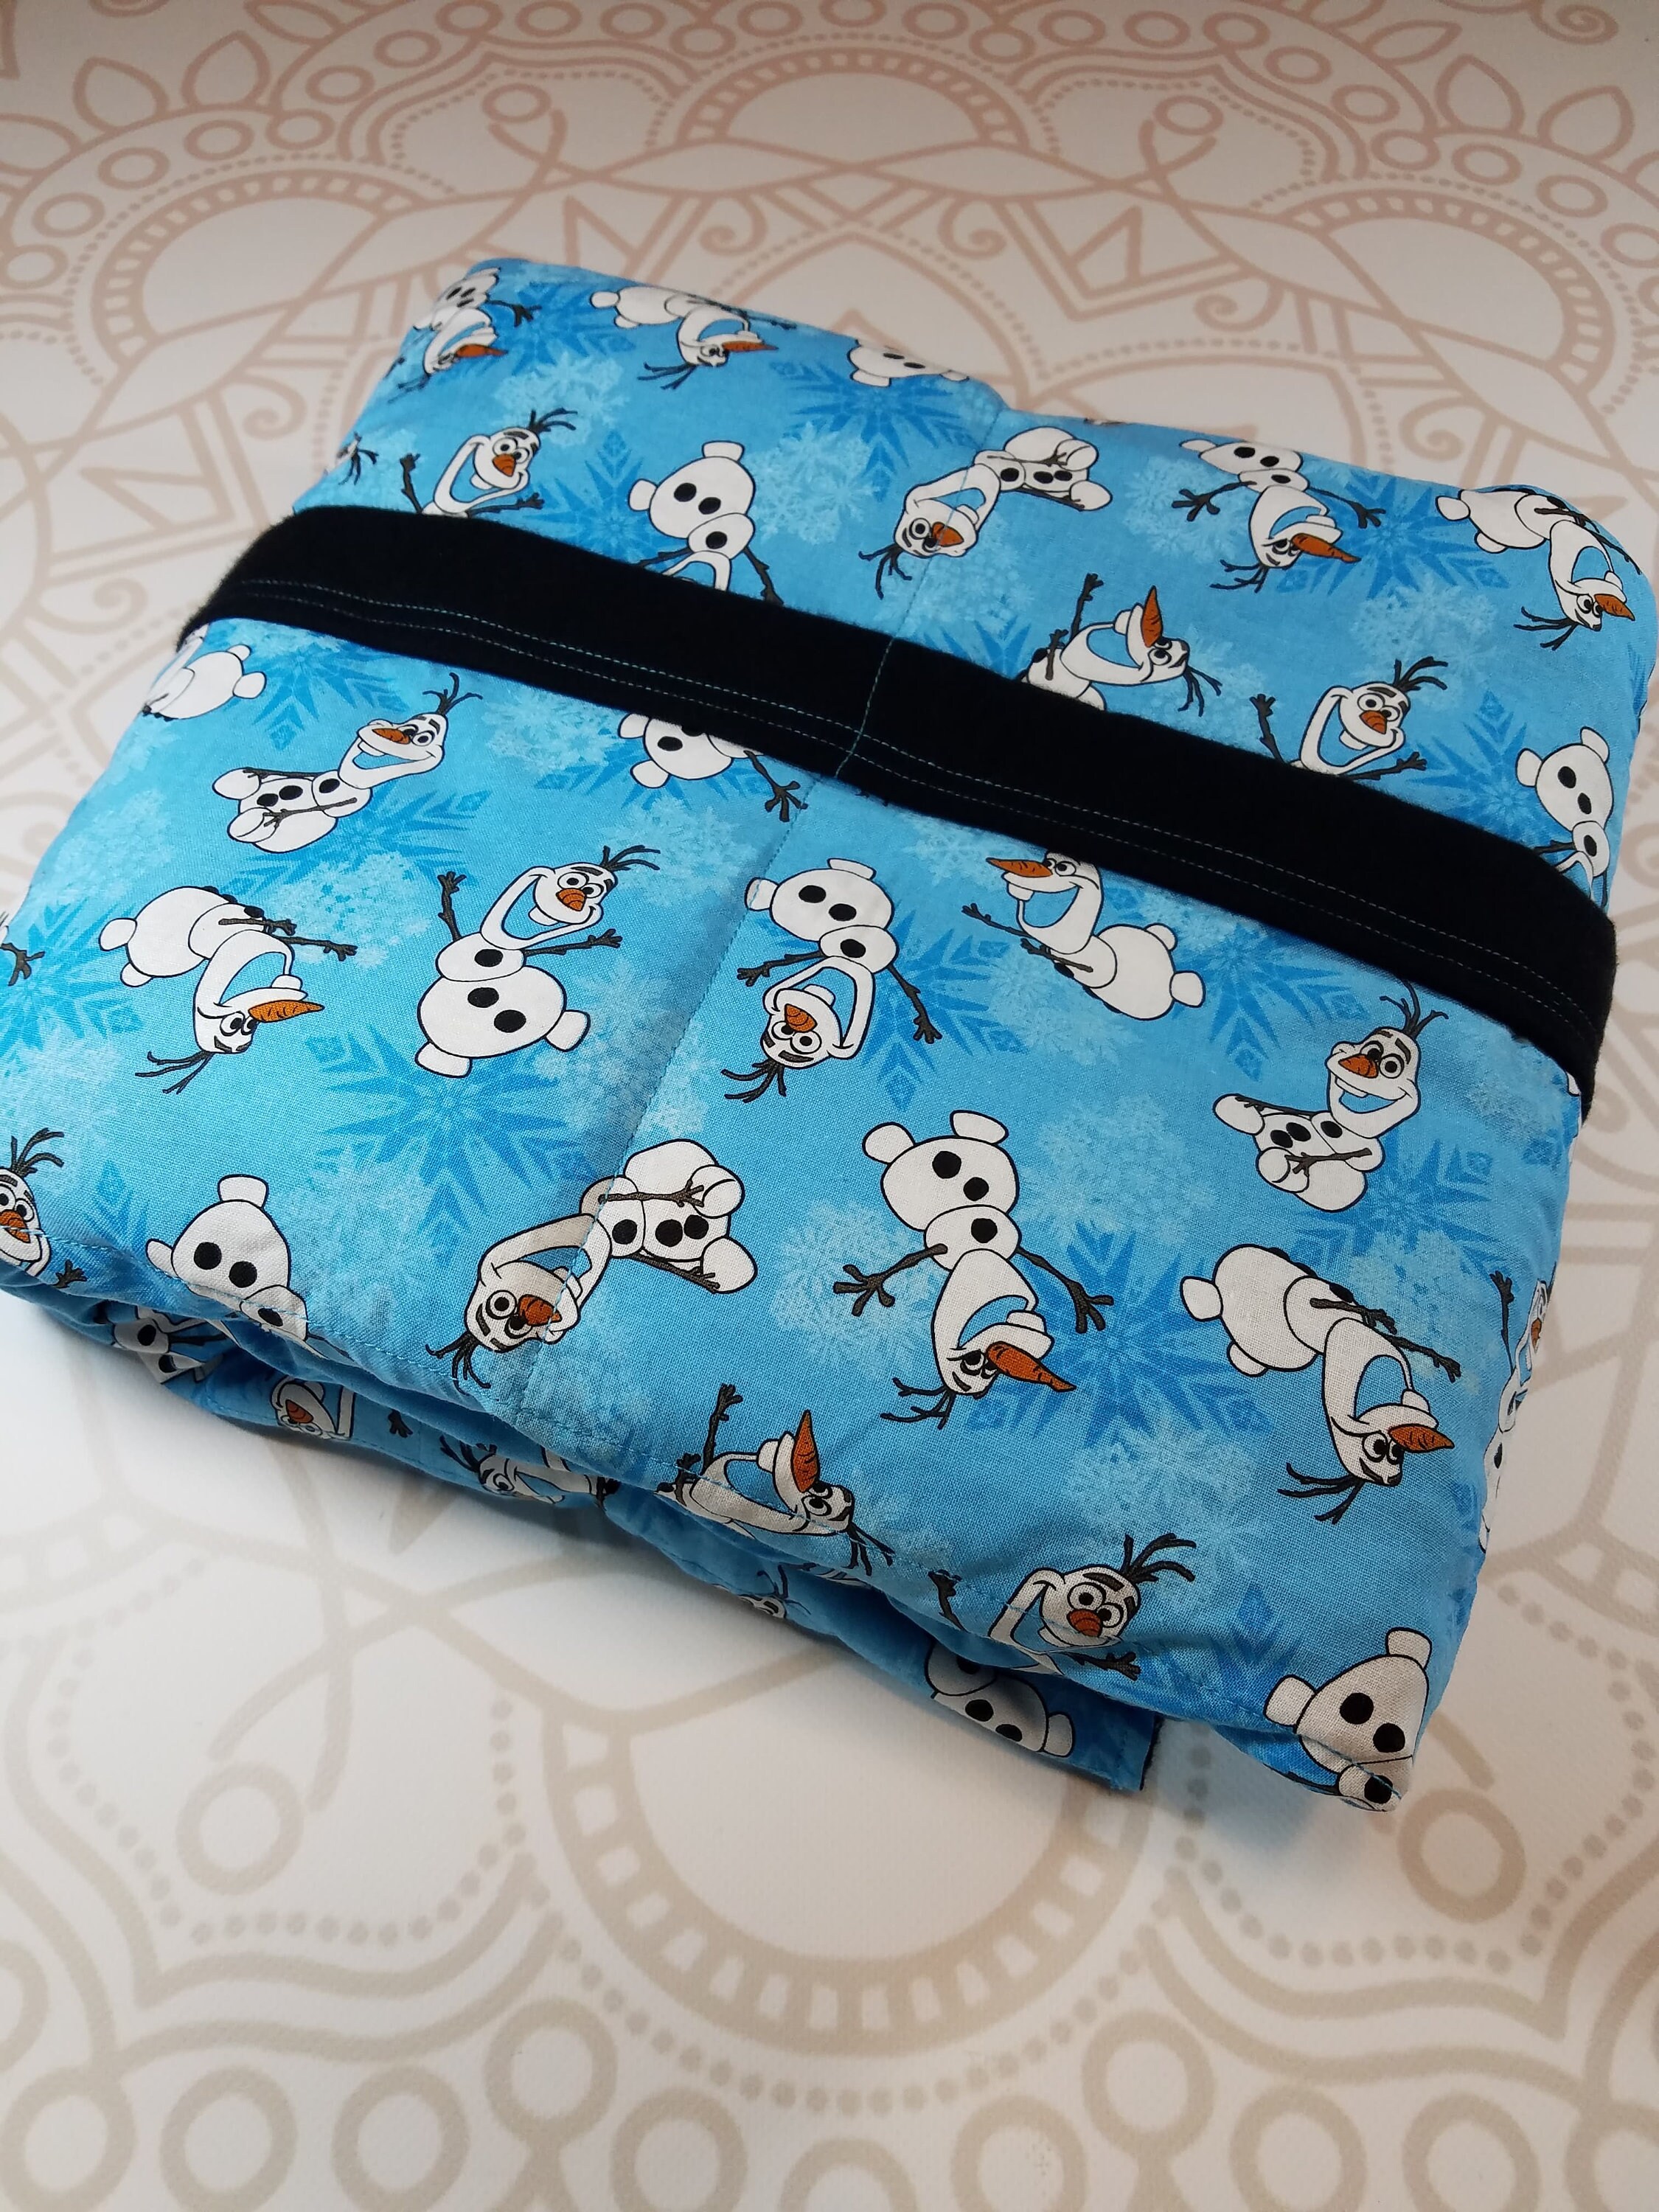 READY to SHIP, 40x70-10 Pounds, Weighted Blanket, Snowman Woven Cotton